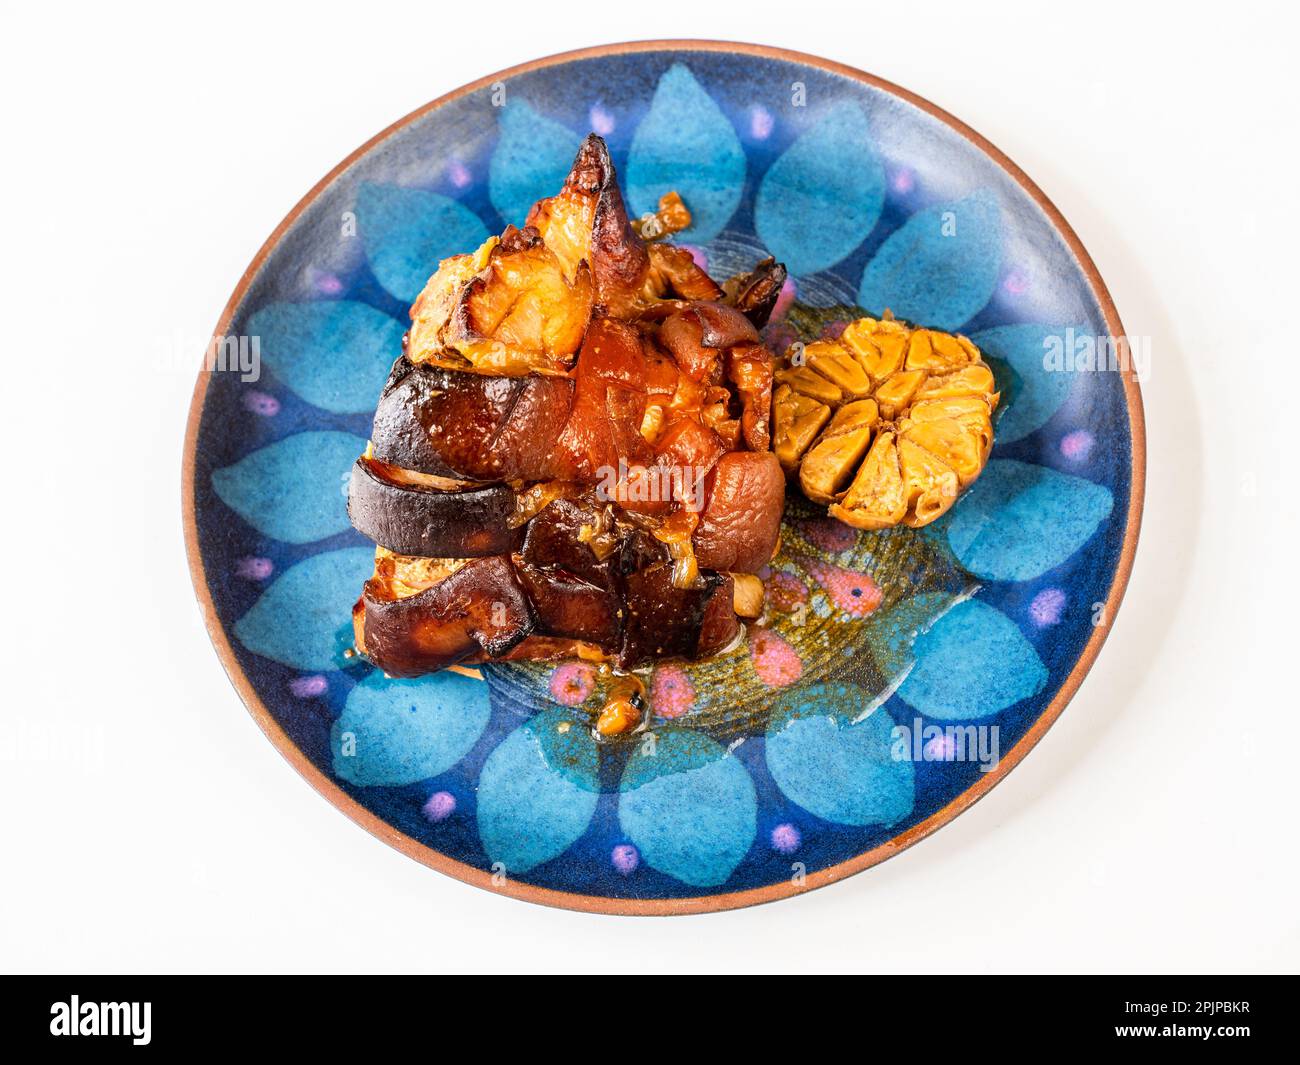 Baked pork belly and garlic on decorative blue plate on white background, closeup. Stock Photo